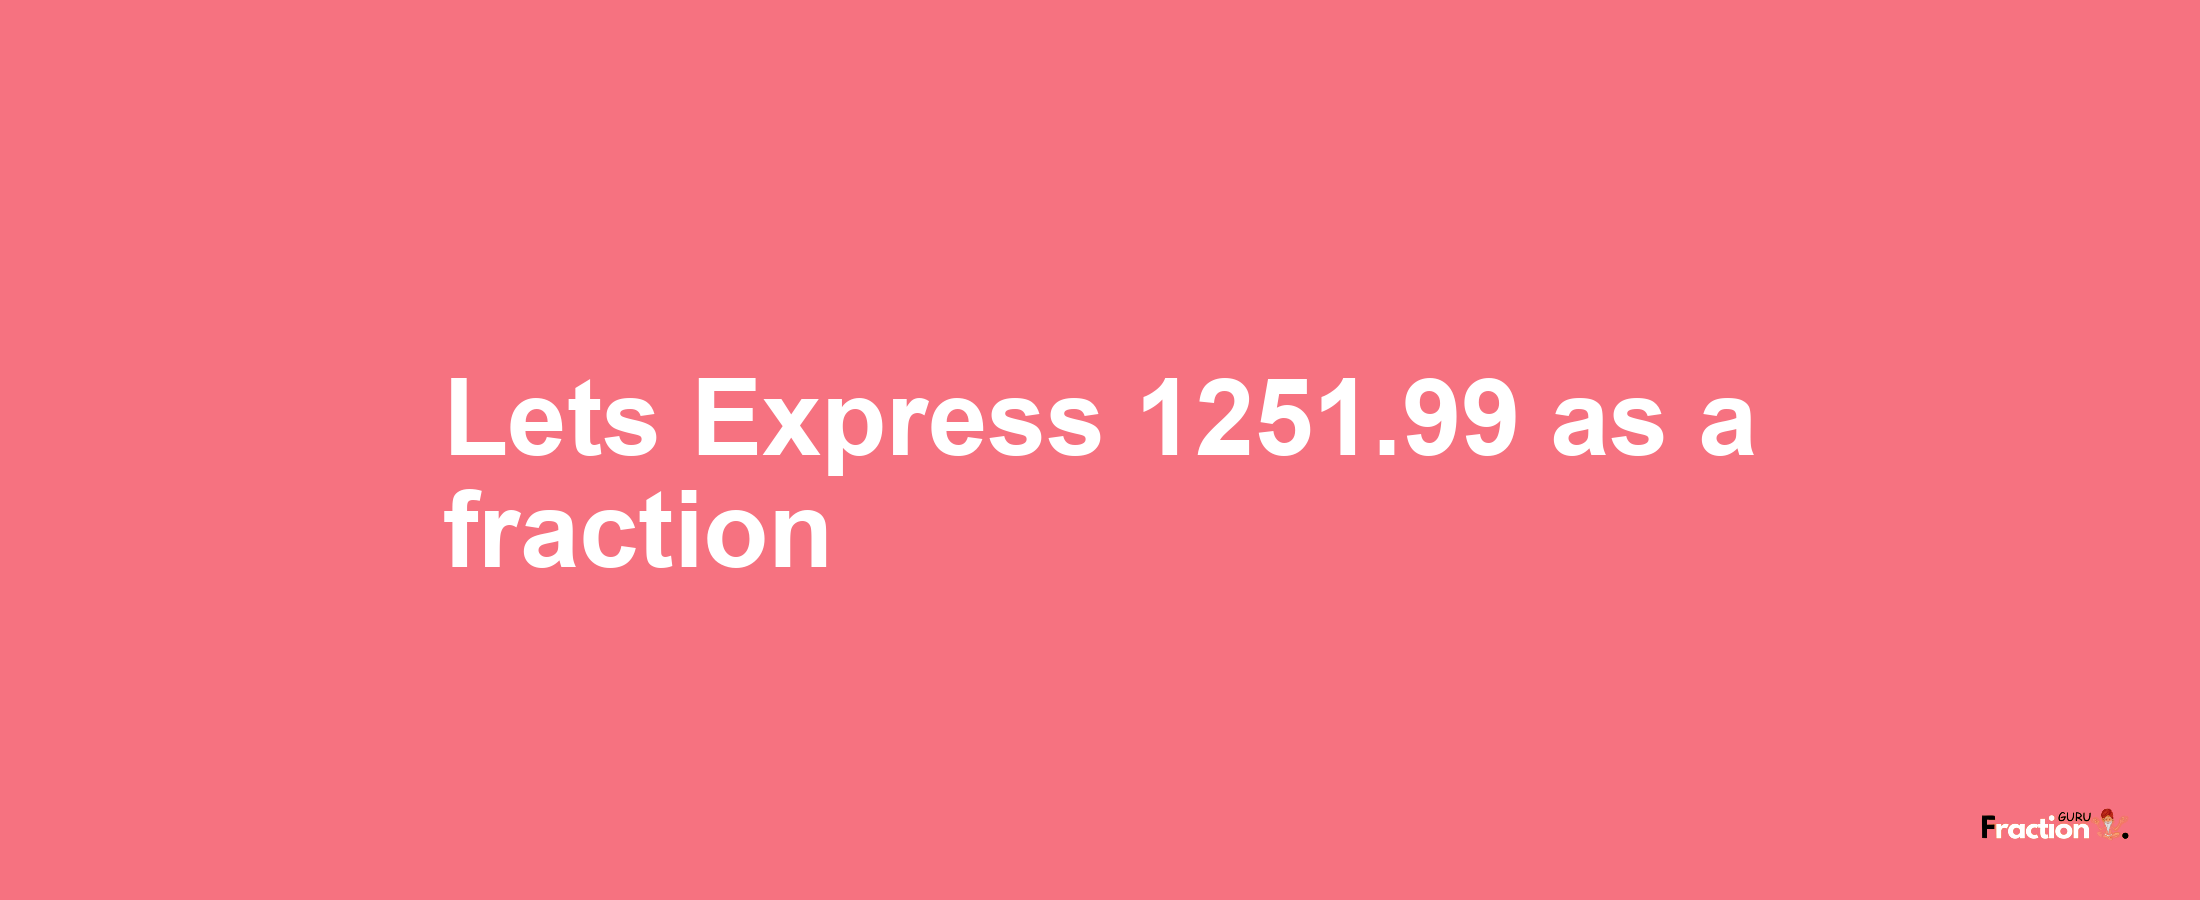 Lets Express 1251.99 as afraction